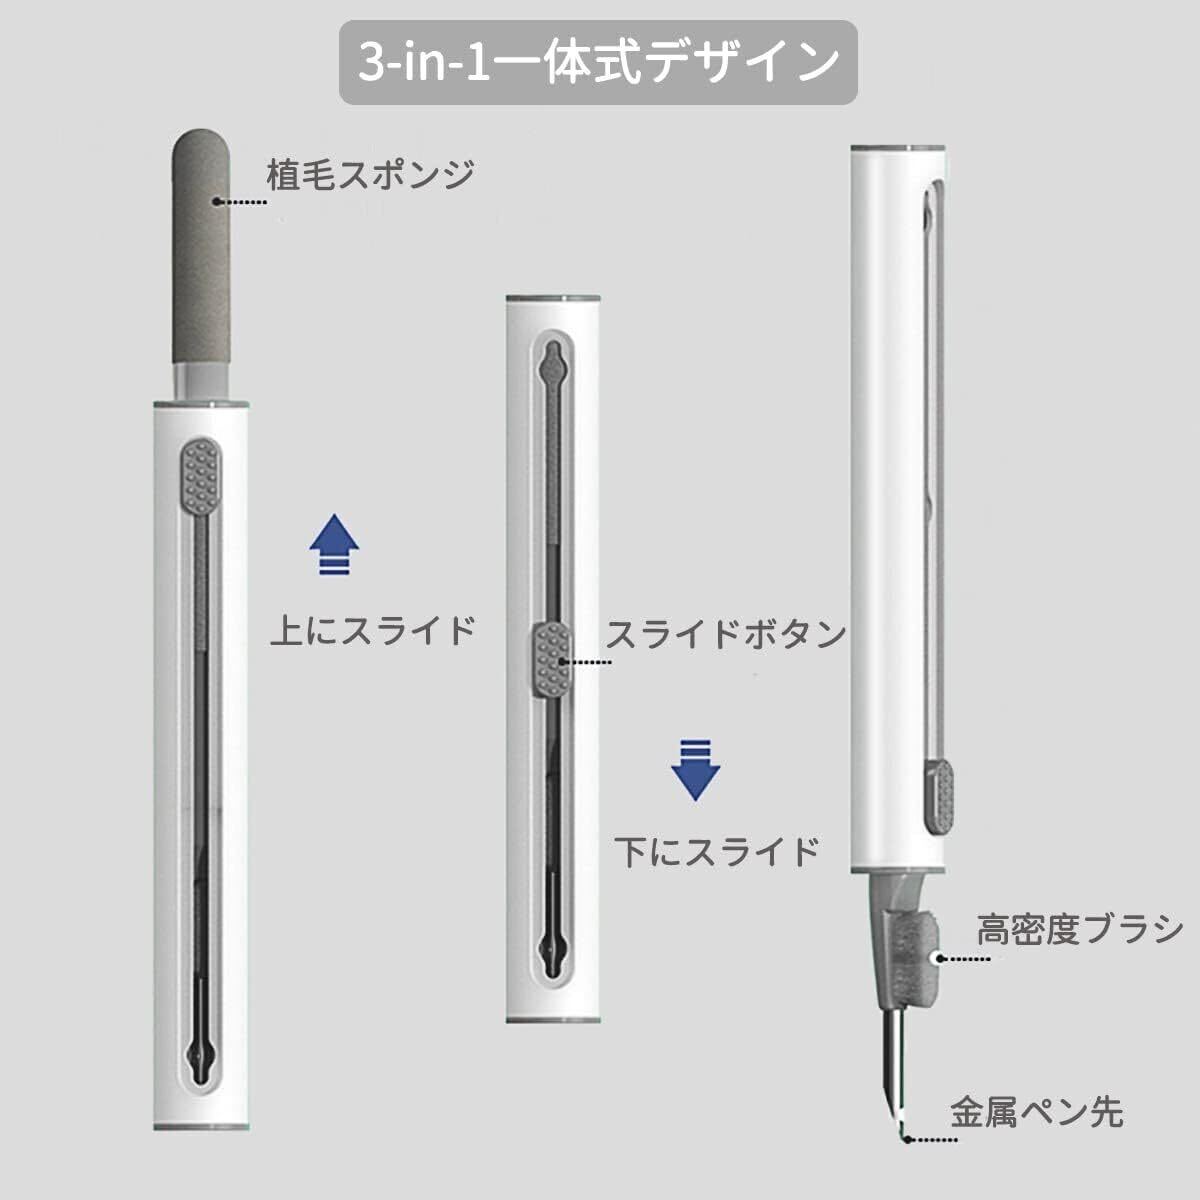 【3-in-1一体型】 イヤホンクリーニング（1枚入り） airpods 掃除キ_画像2